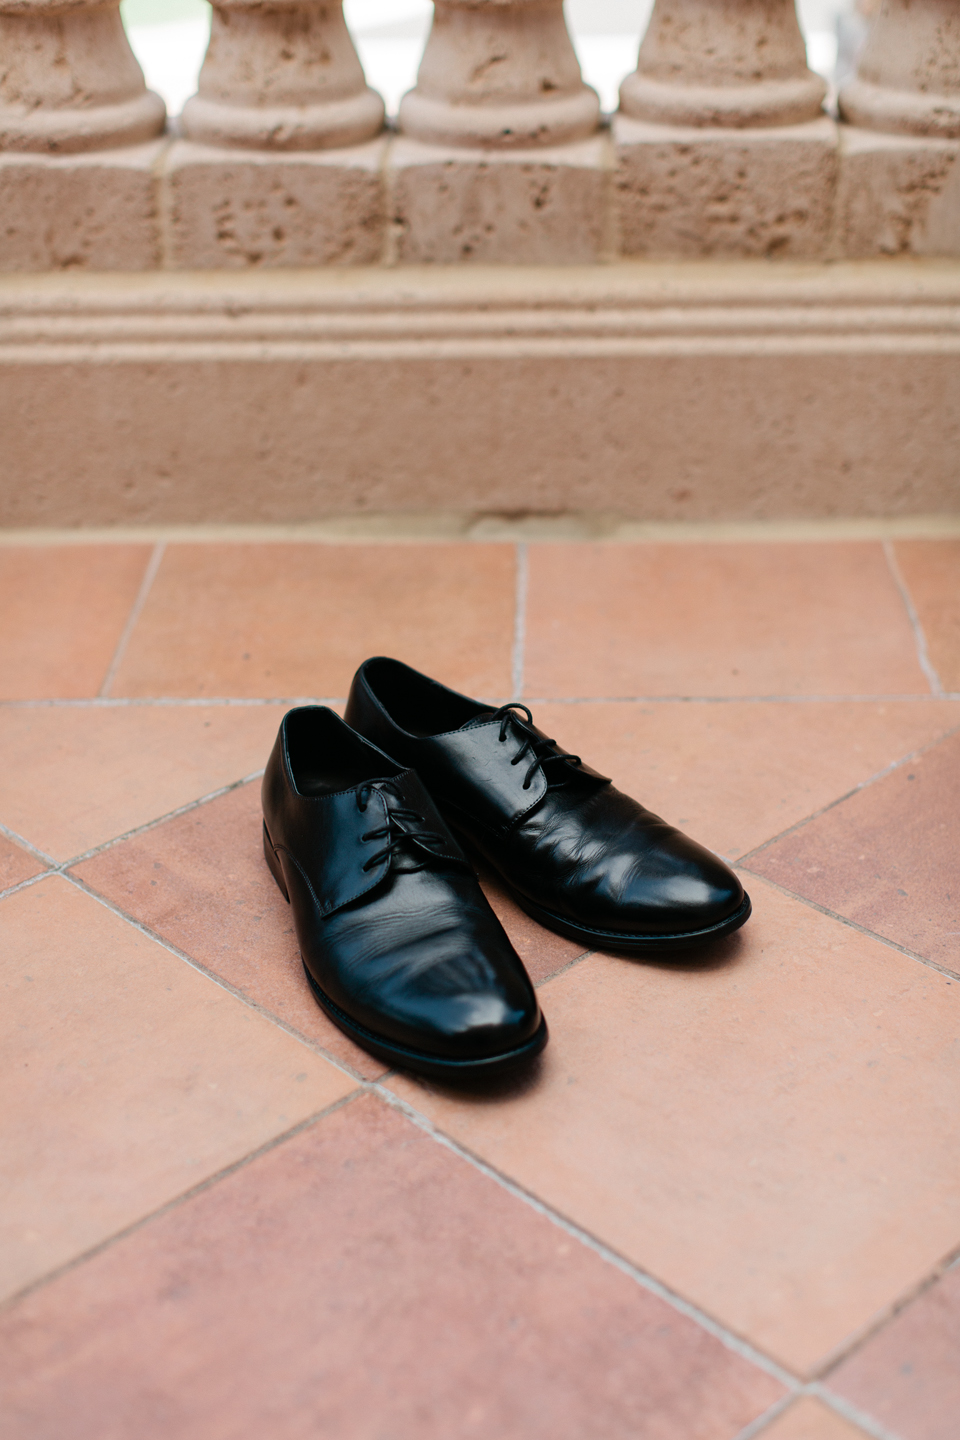 Image of men's dress shoes in black on terracotta tile at the TPC Sawgrass in Ponte Vedra, Florida